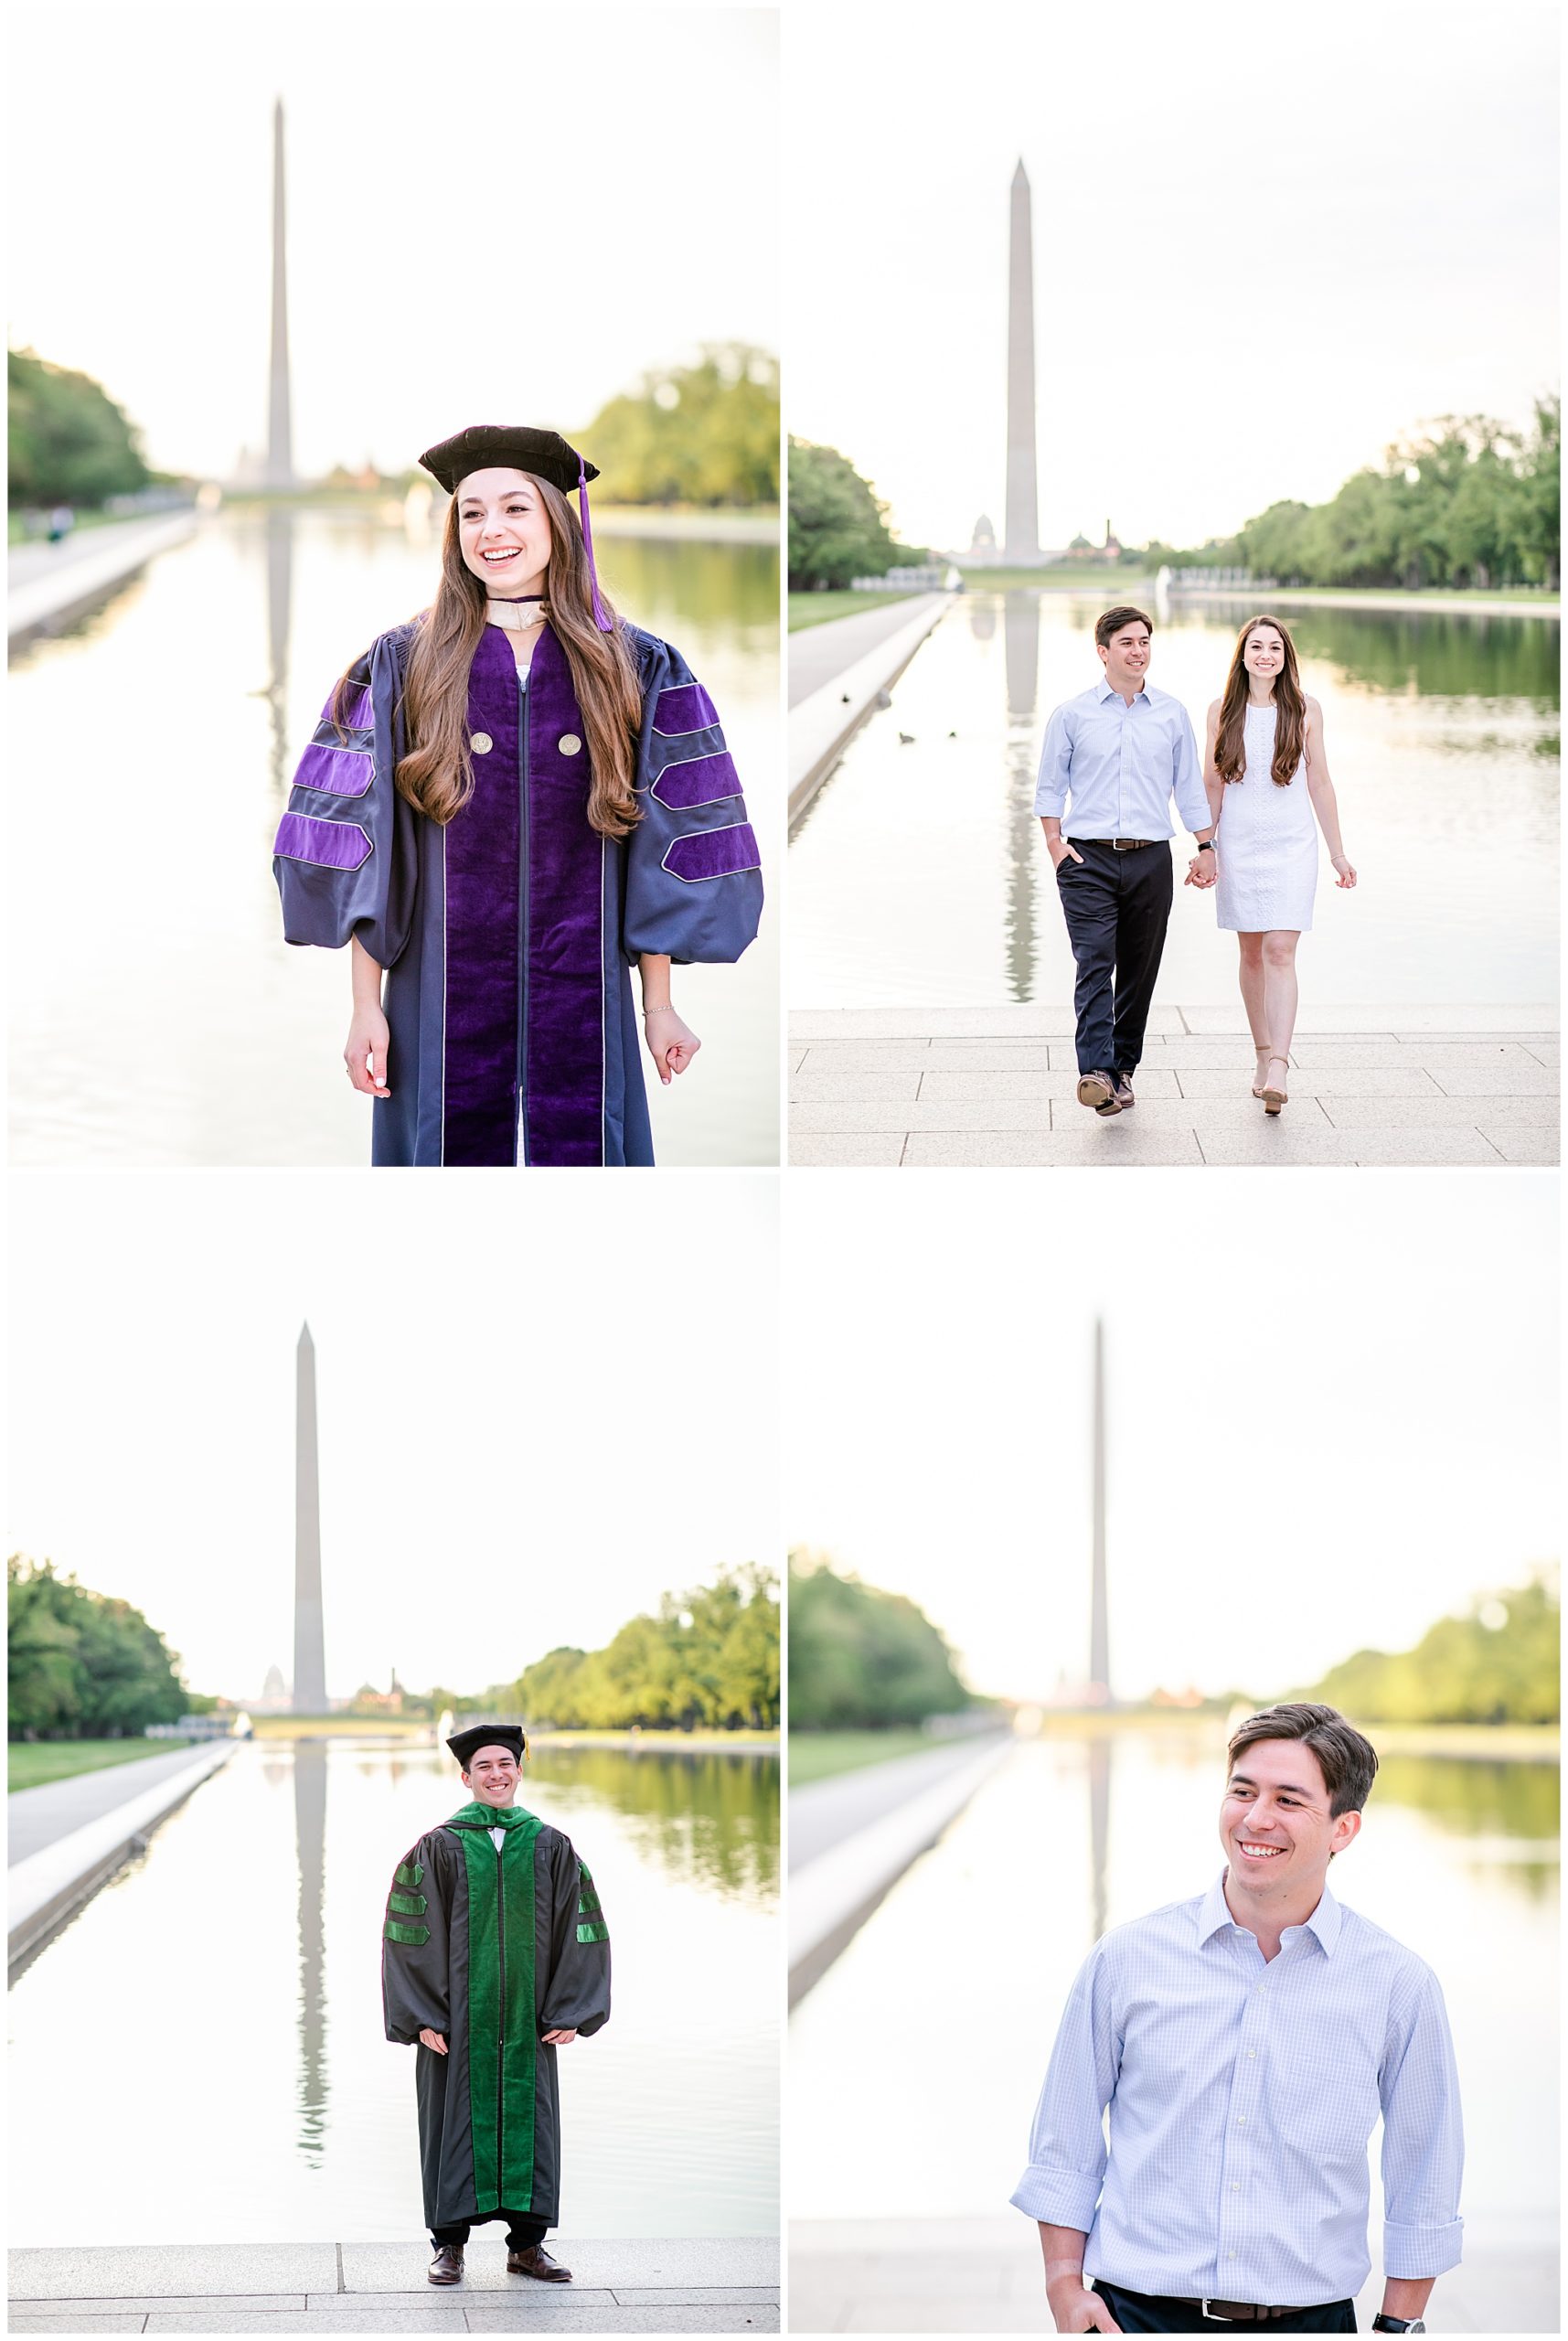 DC couple graduation photos, DC graduation portraits, DC grad photos, DC graduation photographer, spring graduation photos, Georgetown Law graduate, GW Medical School graduate, DC law school graduation photos, DC medical school graduation photos, Rachel E.H. Photography, couple in formal outfits in front of Washington Monument, man in cap and gown in front of Washington Monument, woman in cap and gown in front of Washington Monument